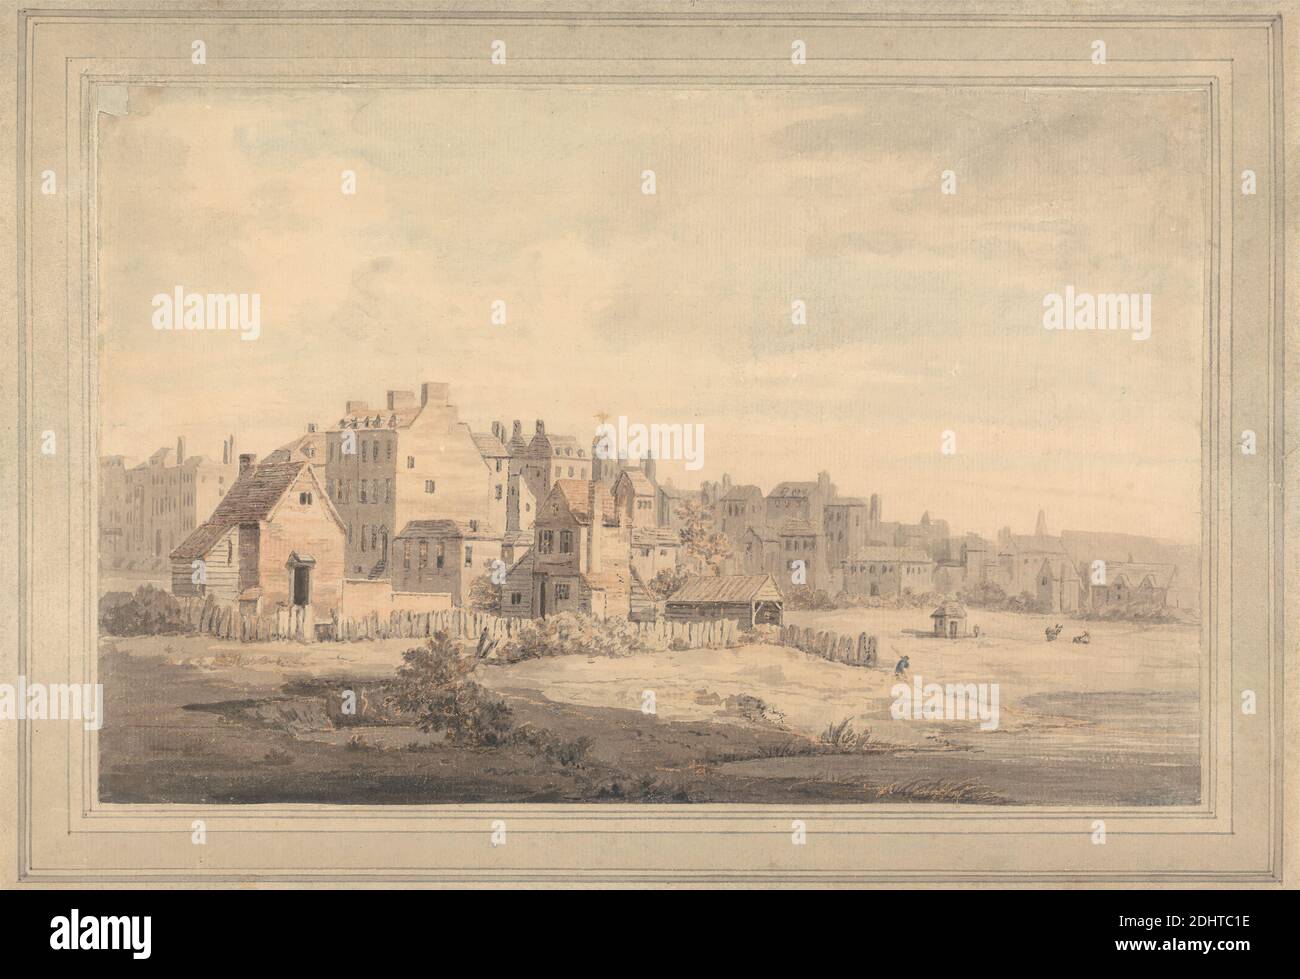 Houses by the Riverside, William Marlow, 1740–1813, British, undated, Watercolor and graphite on medium, slightly textured, cream laid paper, Sheet: 8 1/16 x 12 3/8in. (20.5 x 31.4cm), Sheet: 8 × 12 3/8 inches (20.3 × 31.4 cm), and Mount: 10 × 14 3/4 inches (25.4 × 37.5 cm), cityscape, fence, houses, riverbank, rooftops Stock Photo